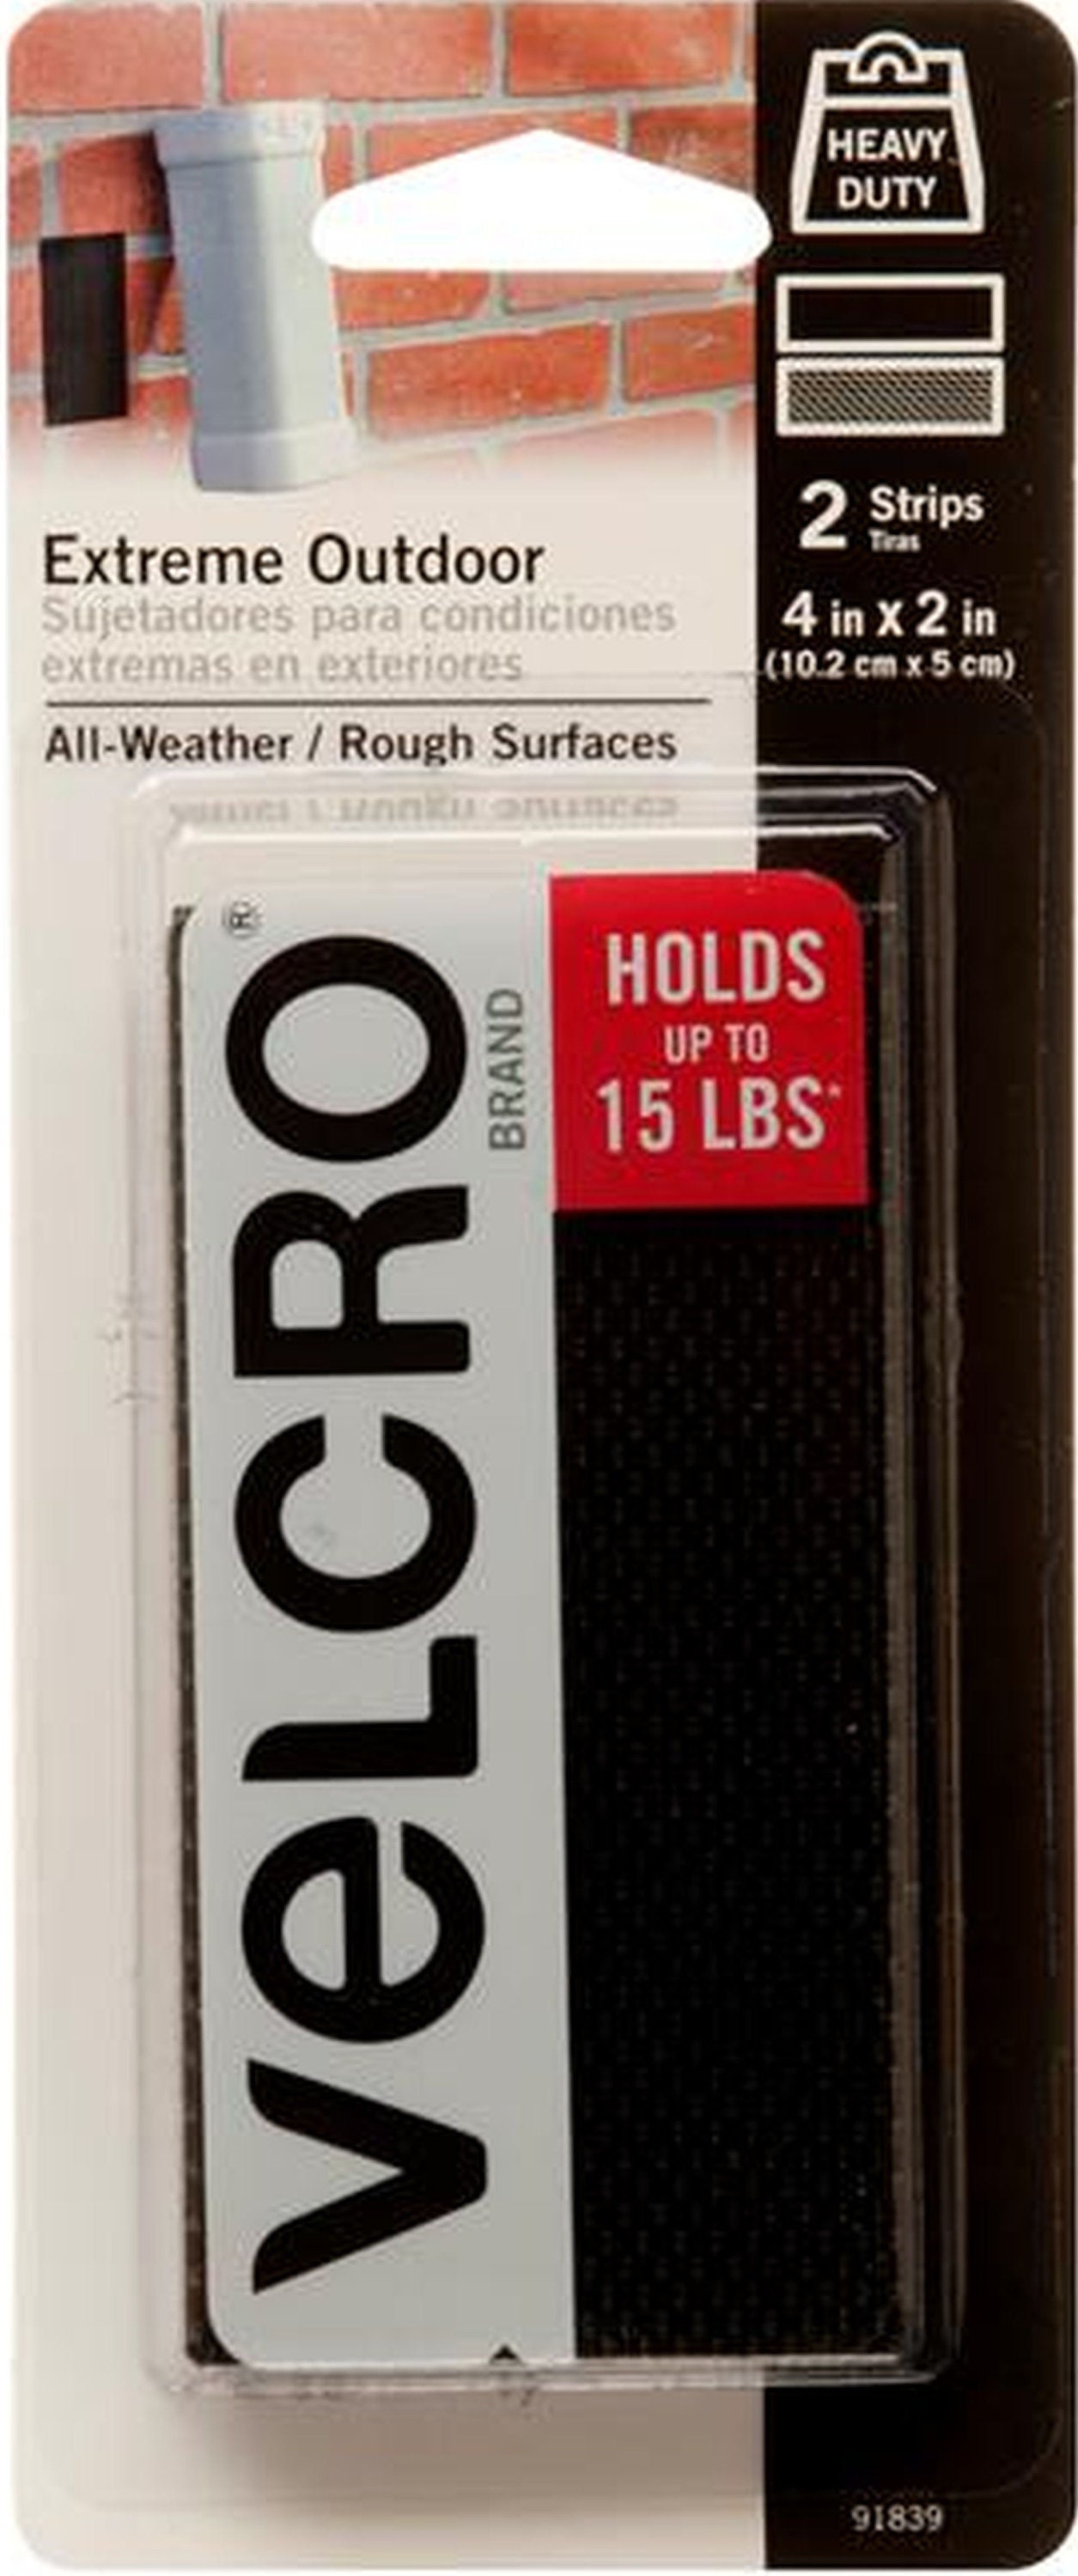 Velcro industrial adhesive - Self-gripping industrial scratch